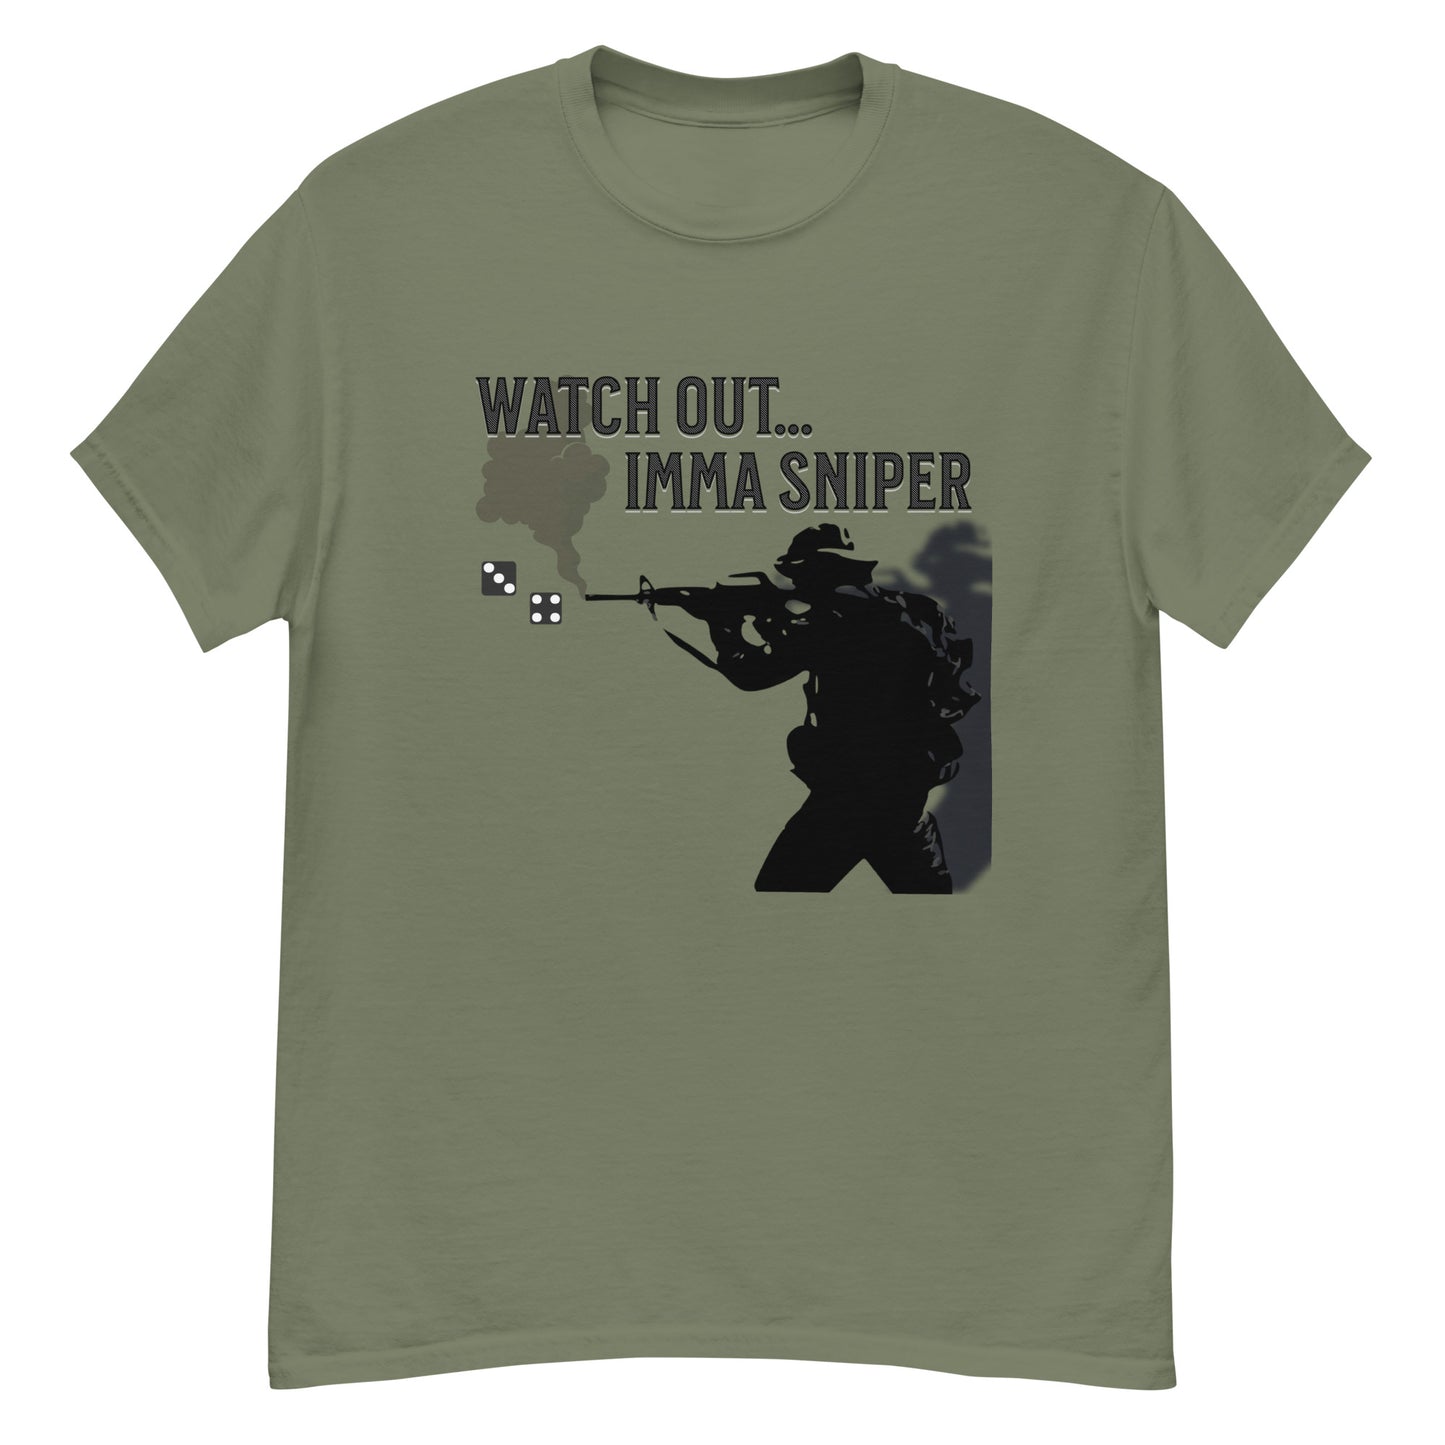 Watch Out... Imma Sniper